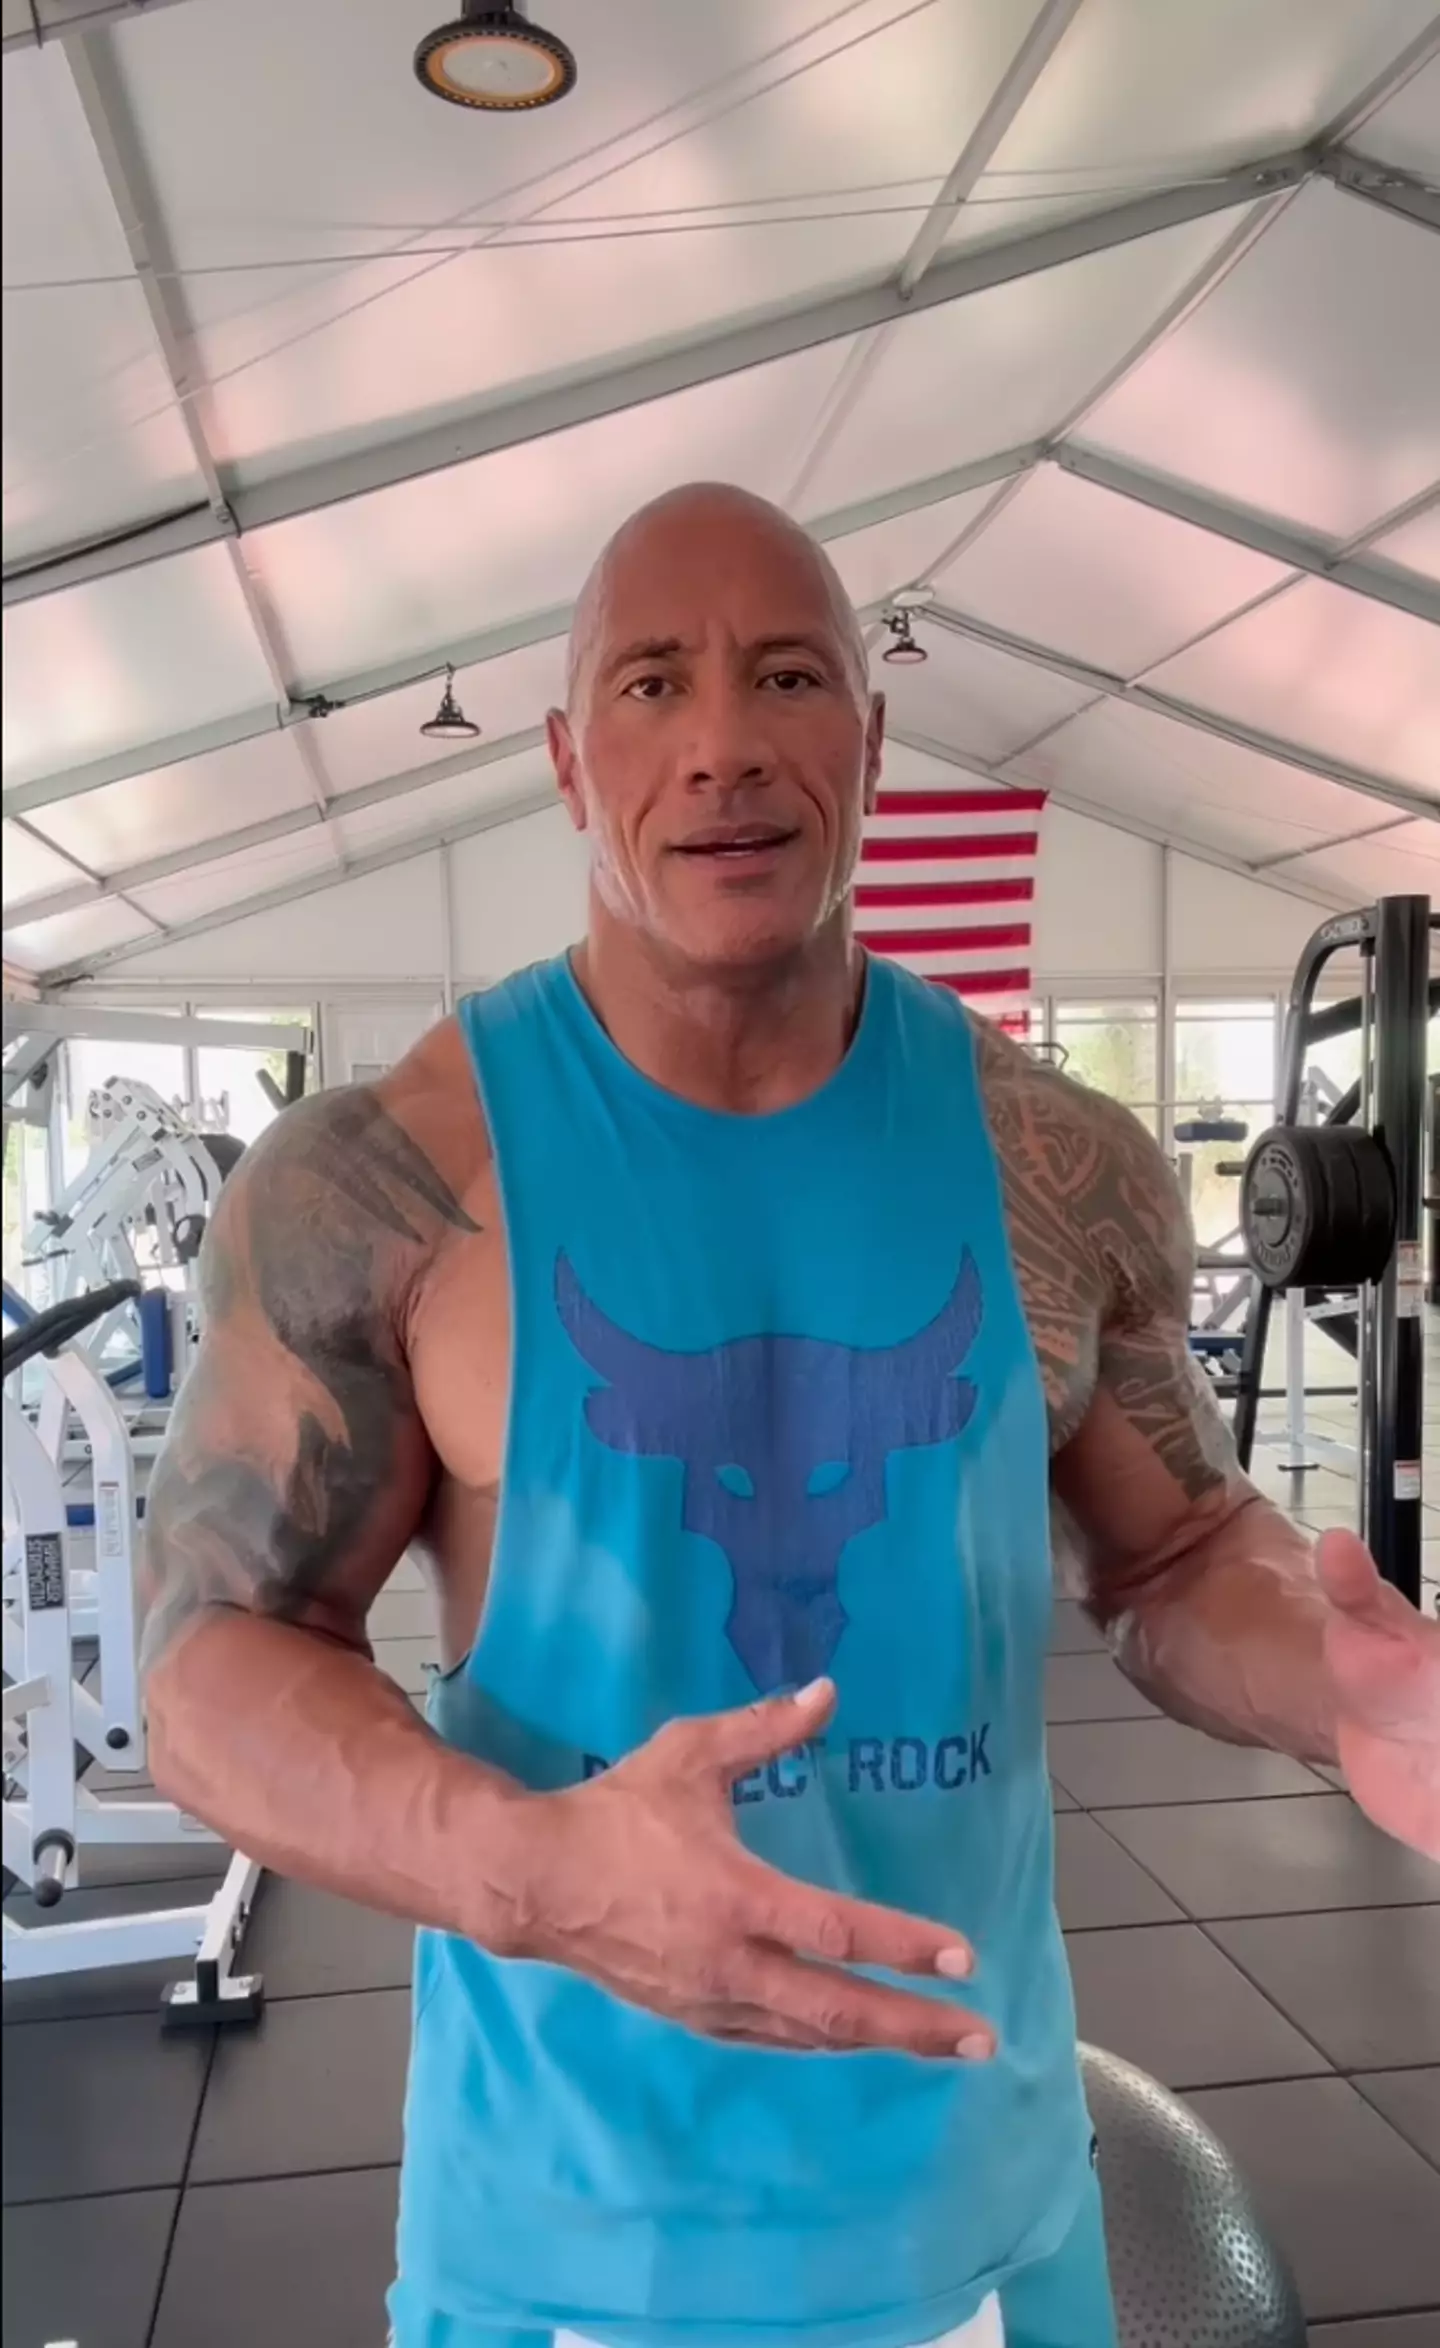 The Rock spends a lot of time in his gym earning his cheat meals.